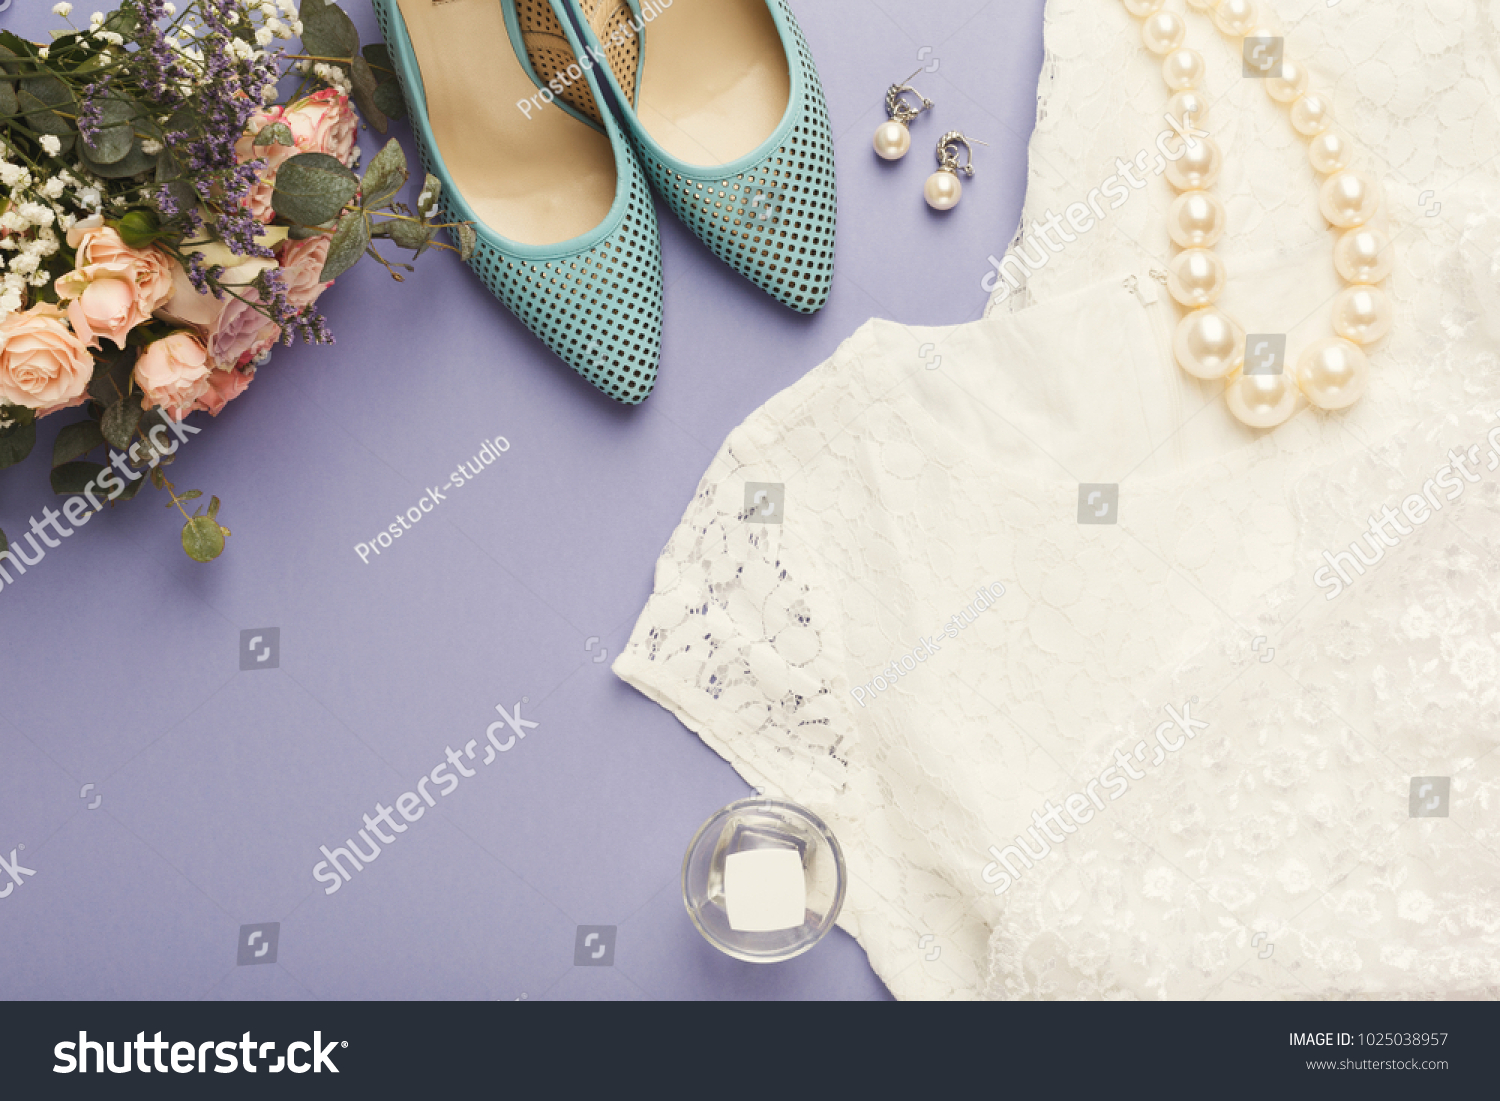 white dress with purple accessories